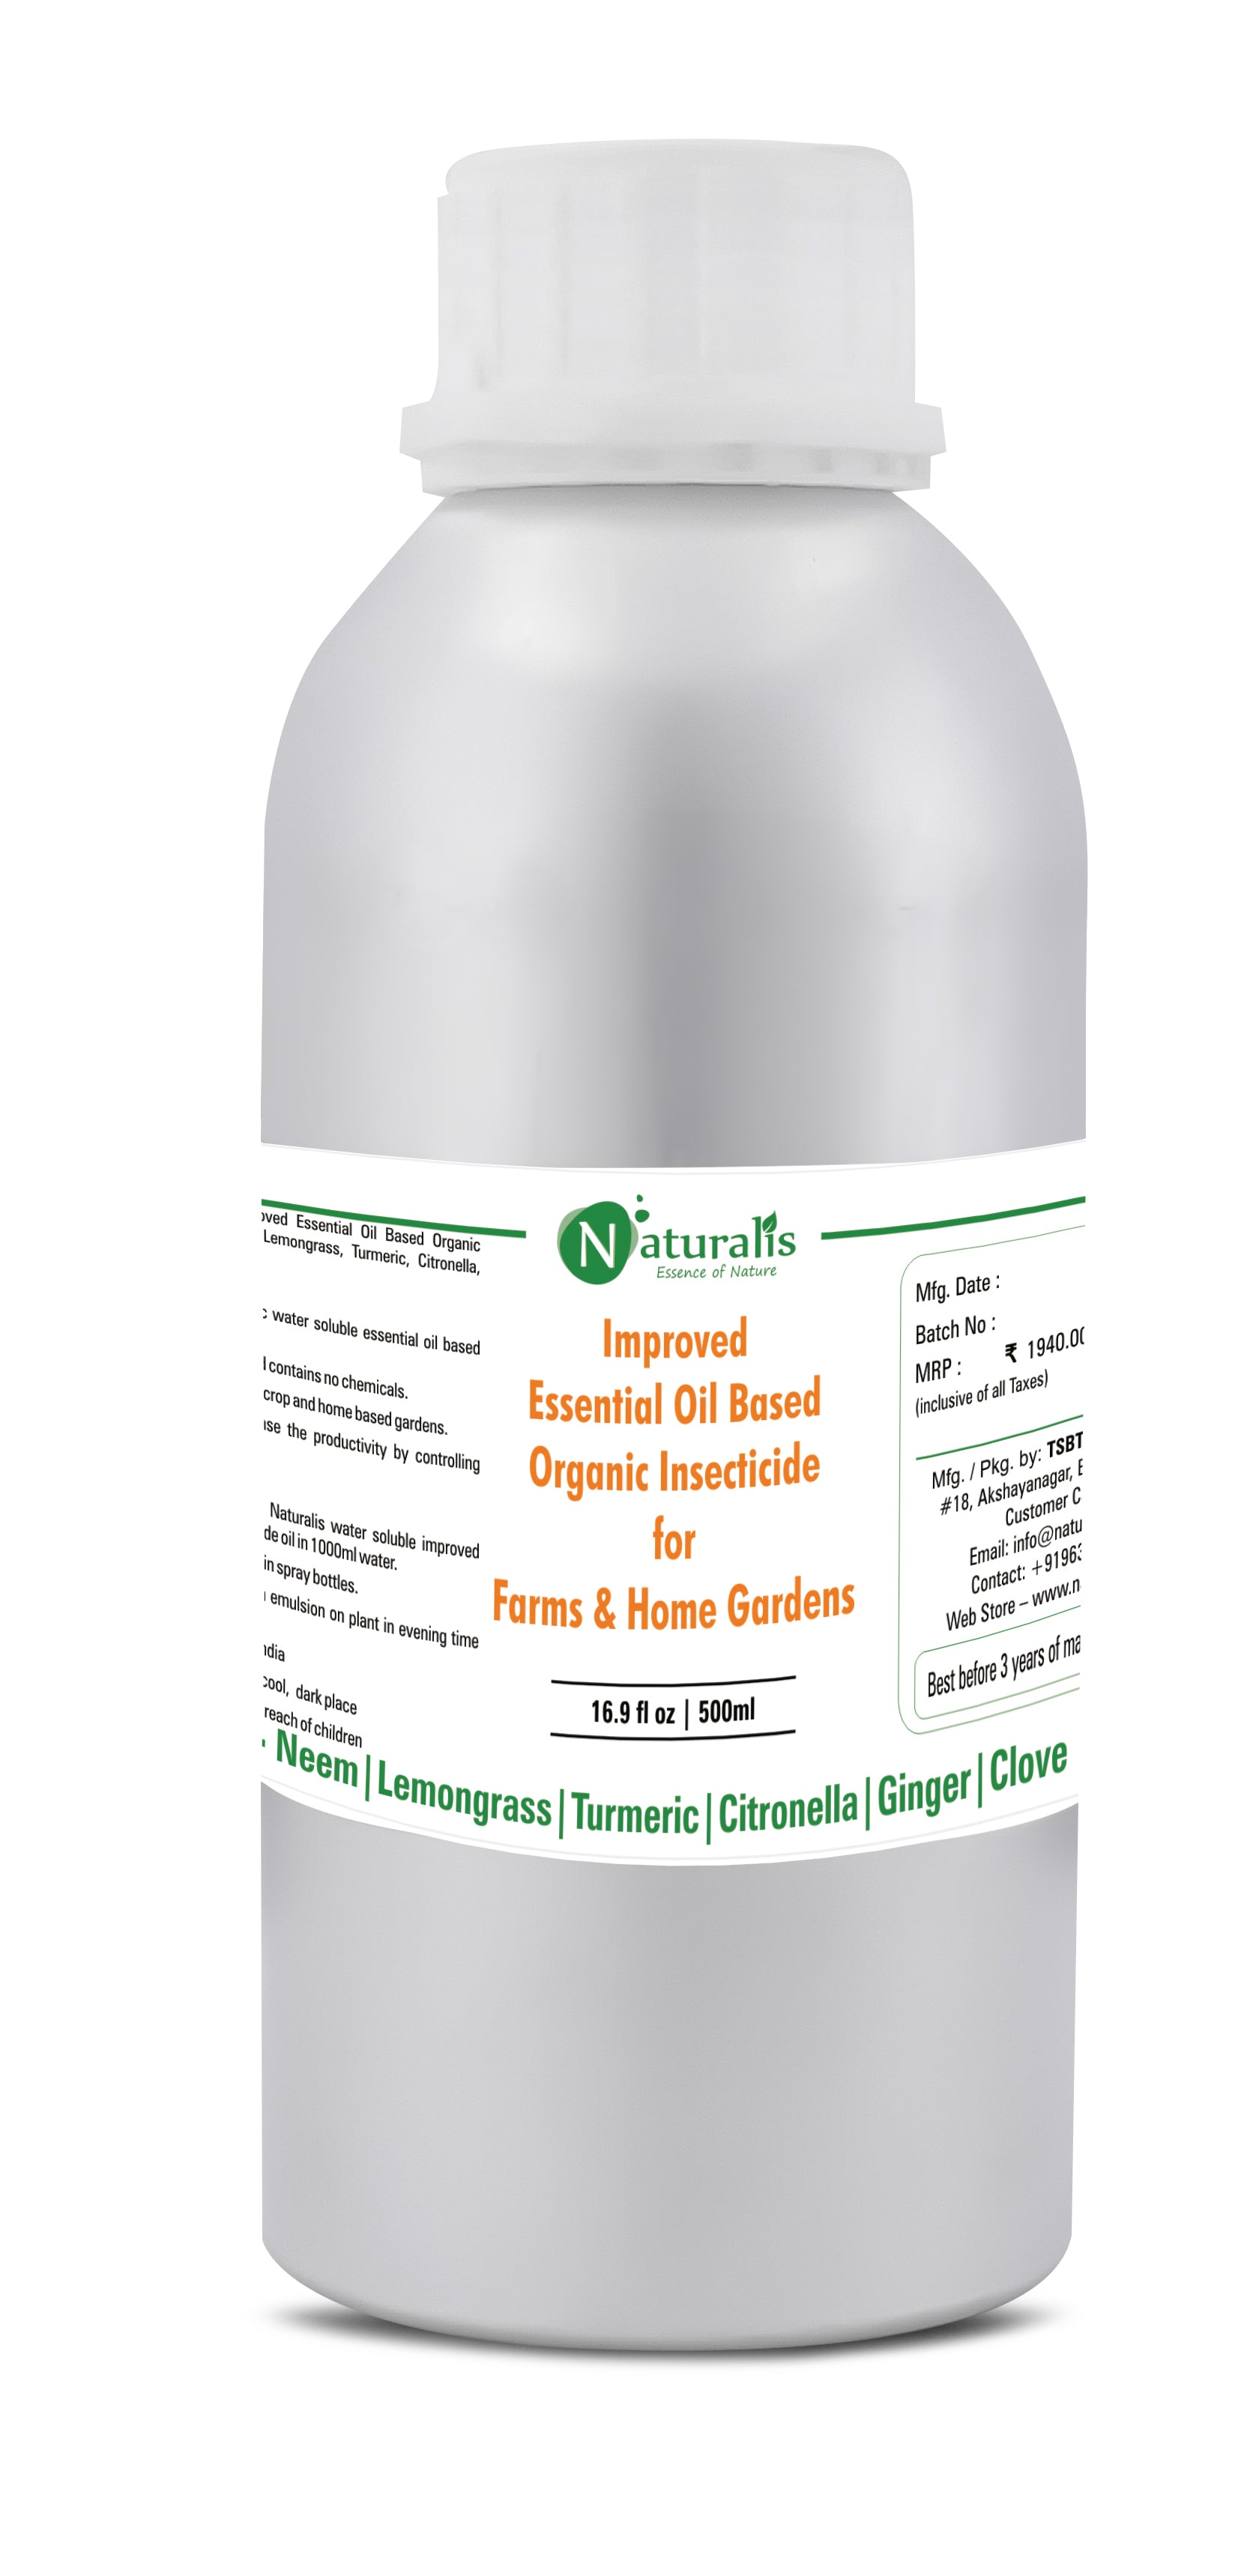 Naturalis New Improved Essential Oil Based Organic Insecticide (Neem, Lemongrass, Citronella, Turmeric) Farms & Home Gardens - Naturalis